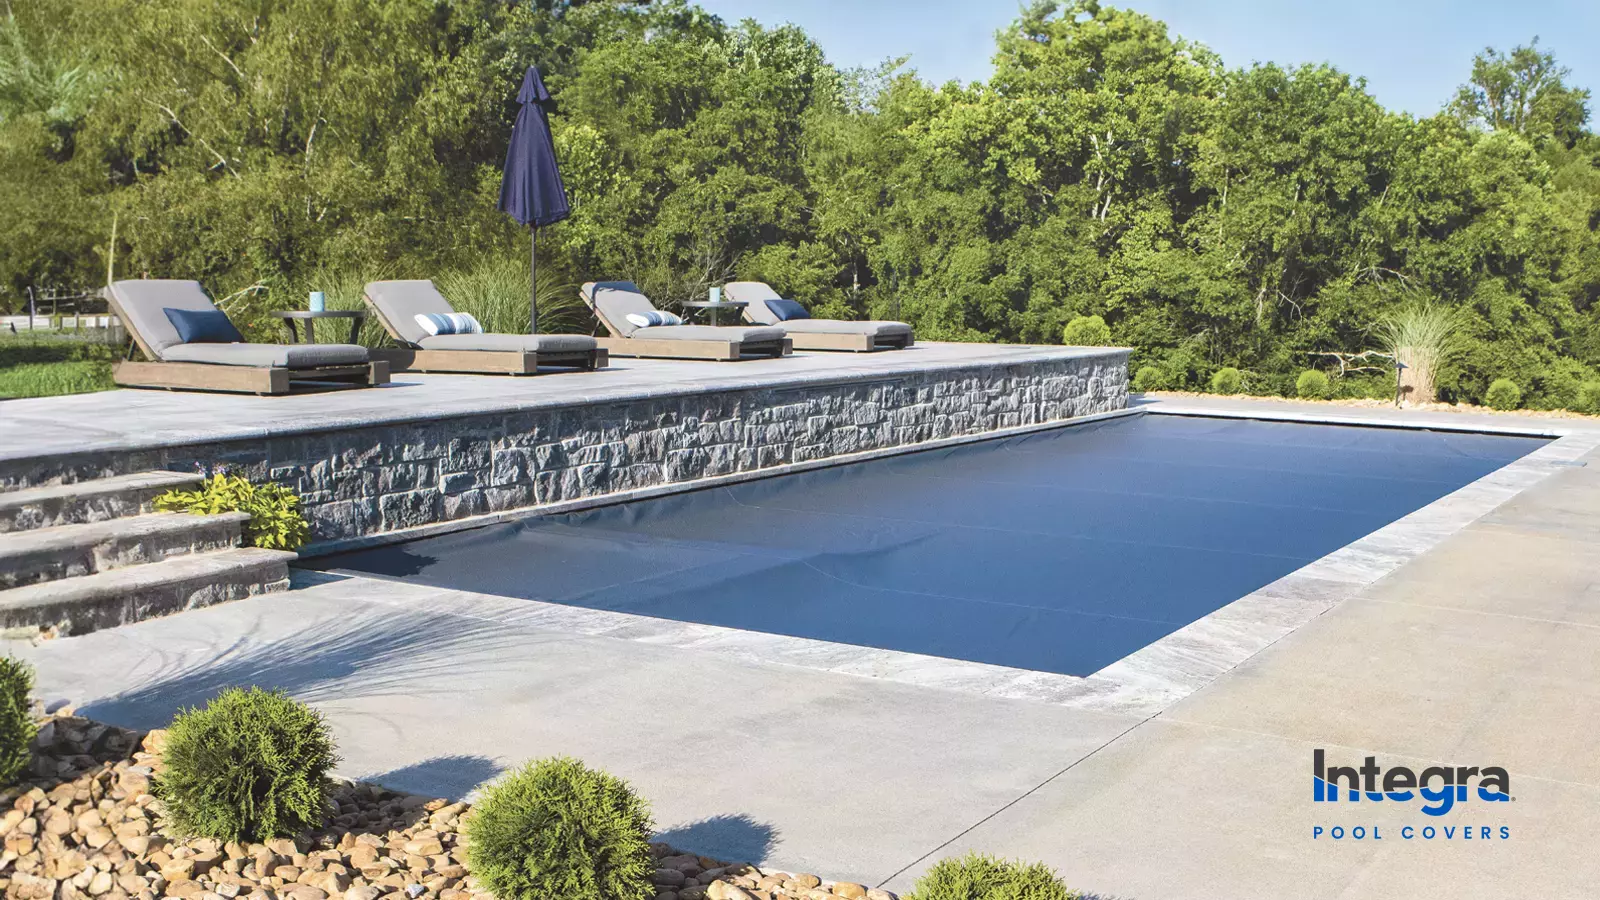 Automatic Pool Covers from Integra Pool Covers